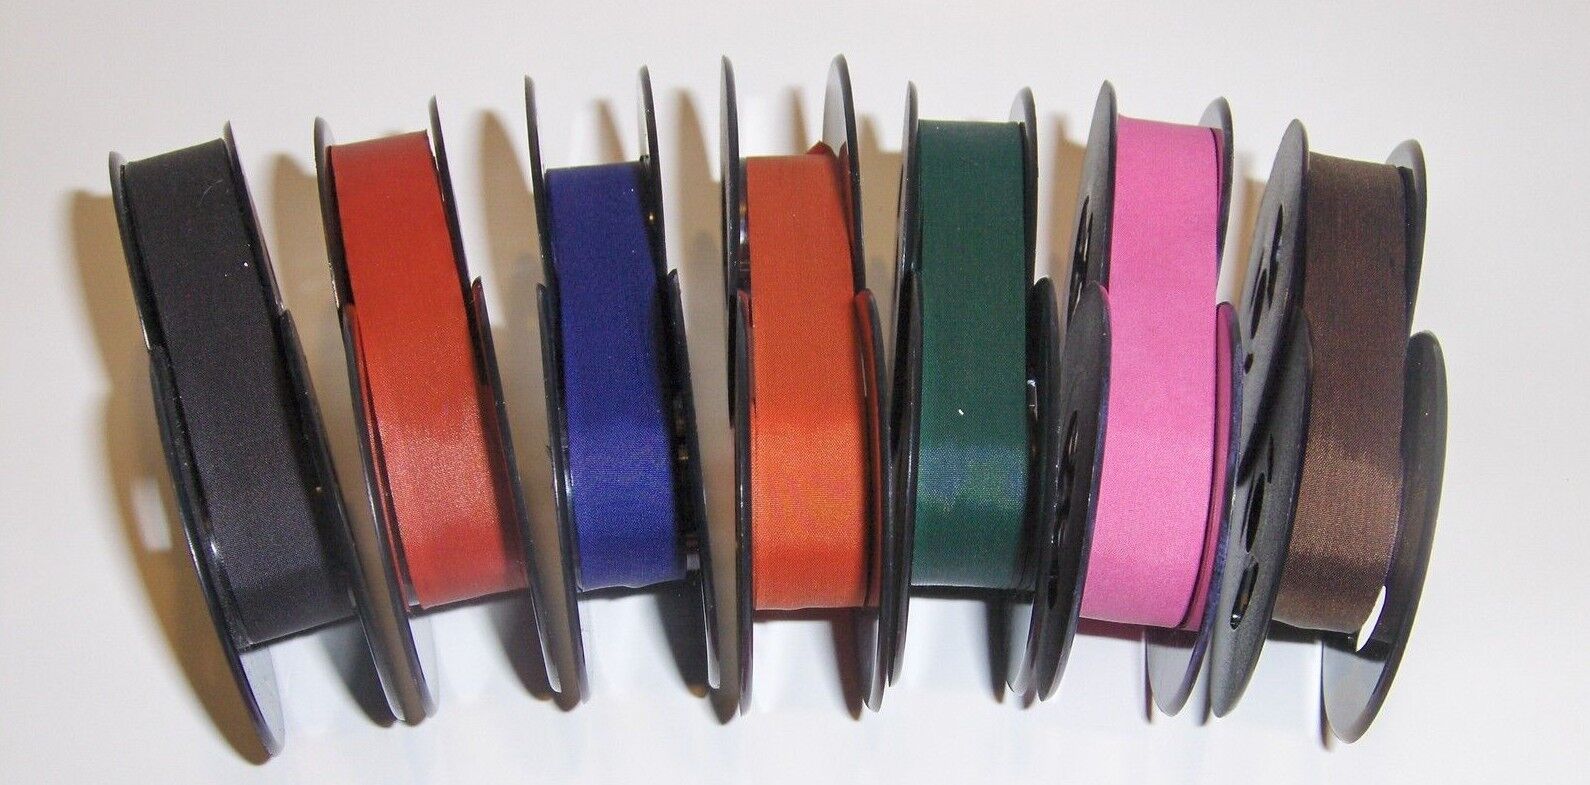 7 pack Colored Olympia SM9 Typewriter Ribbons in new Colors (Free Ship in USA)